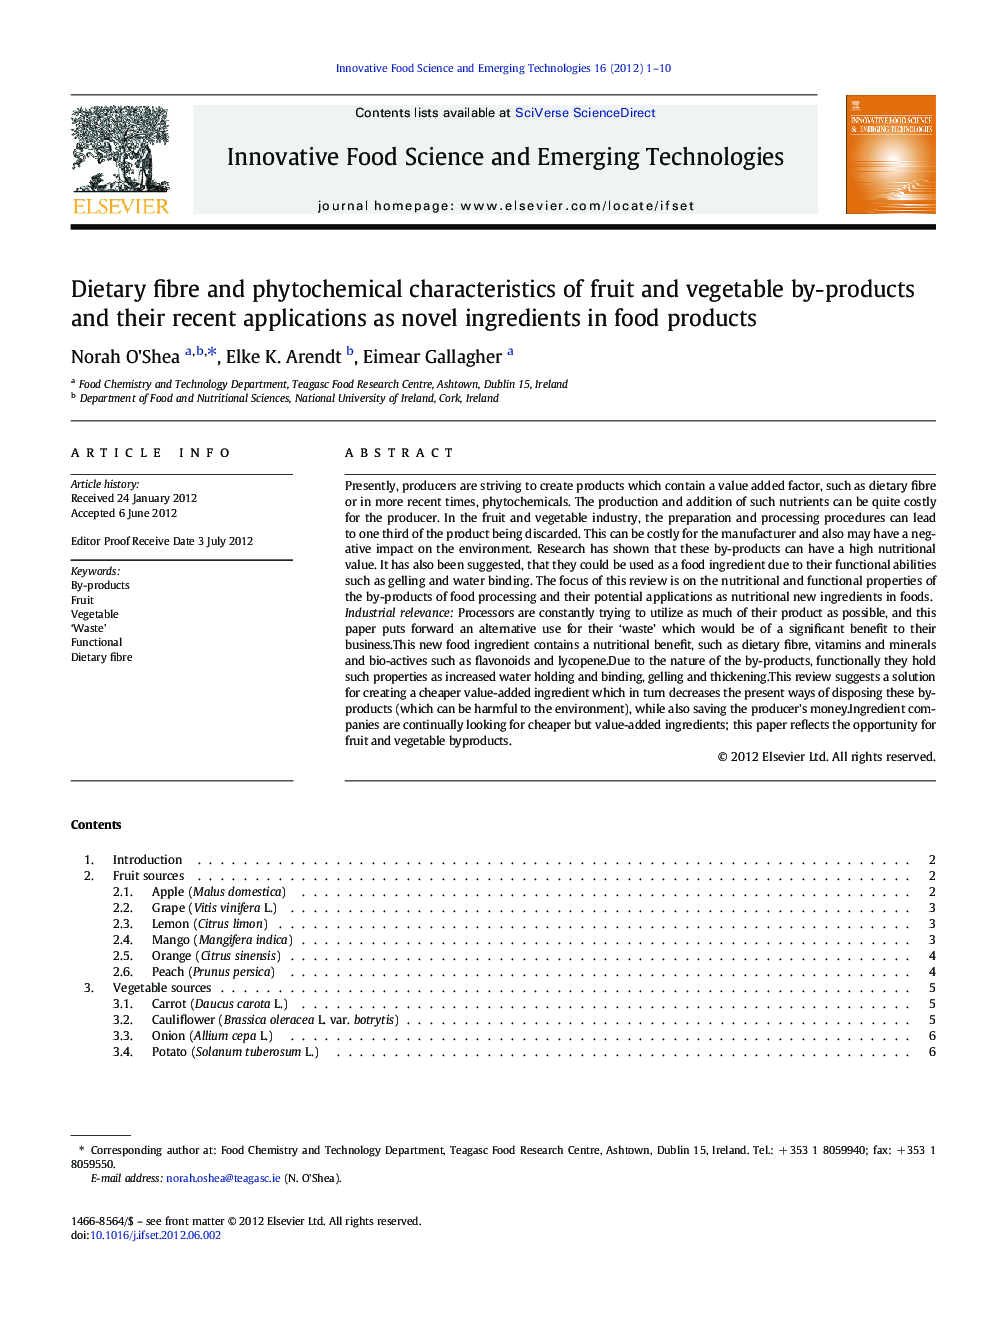 Dietary fibre and phytochemical characteristics of fruit and vegetable by-products and their recent applications as novel ingredients in food products